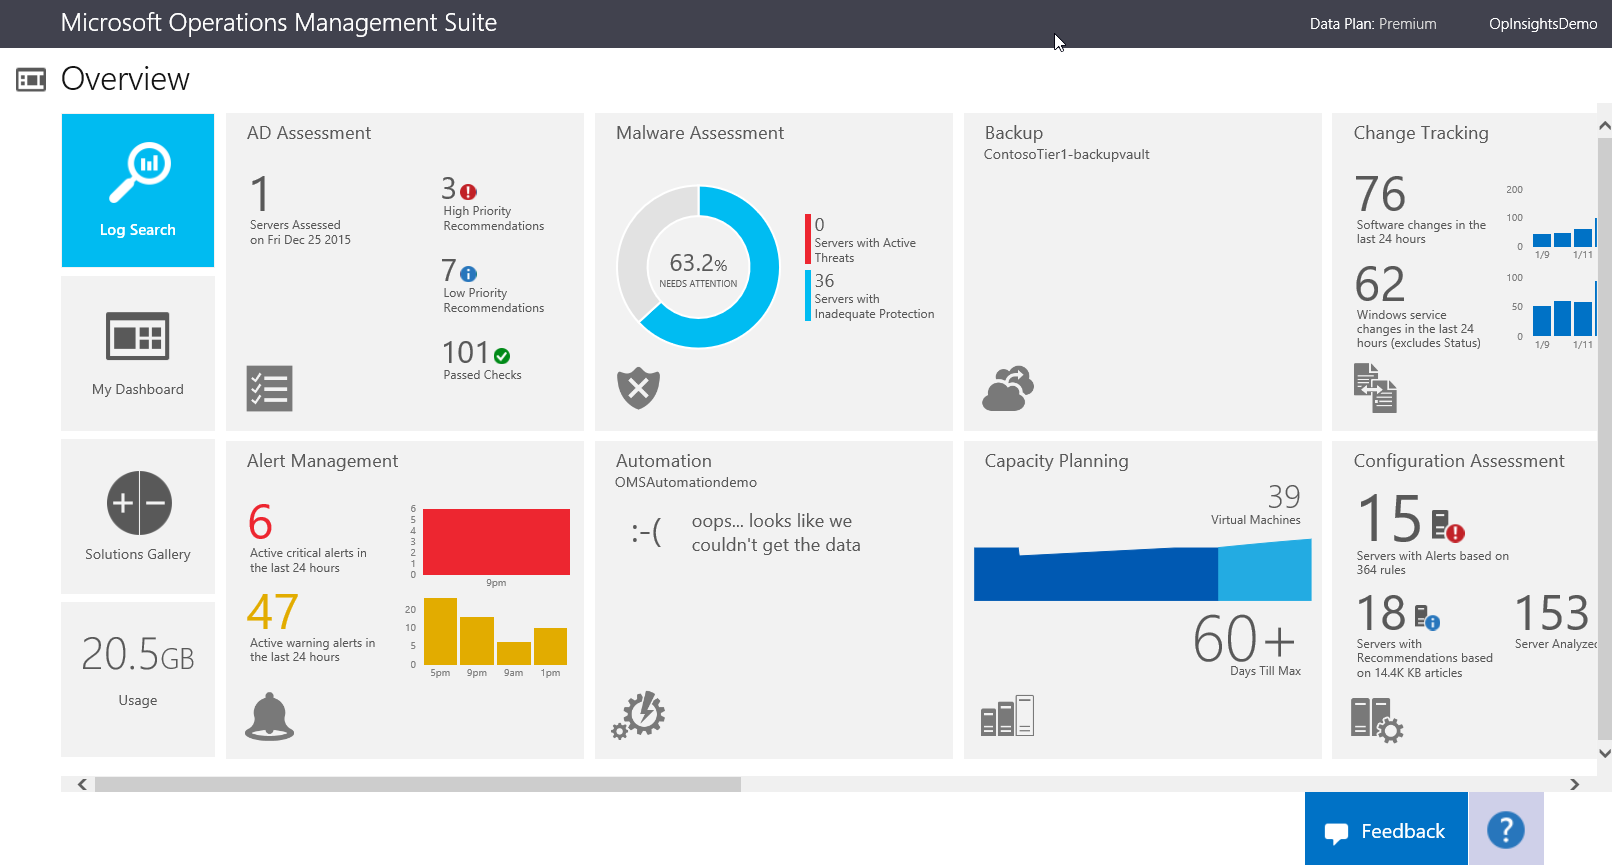 Microsoft announces new updates for Operations Management Suite